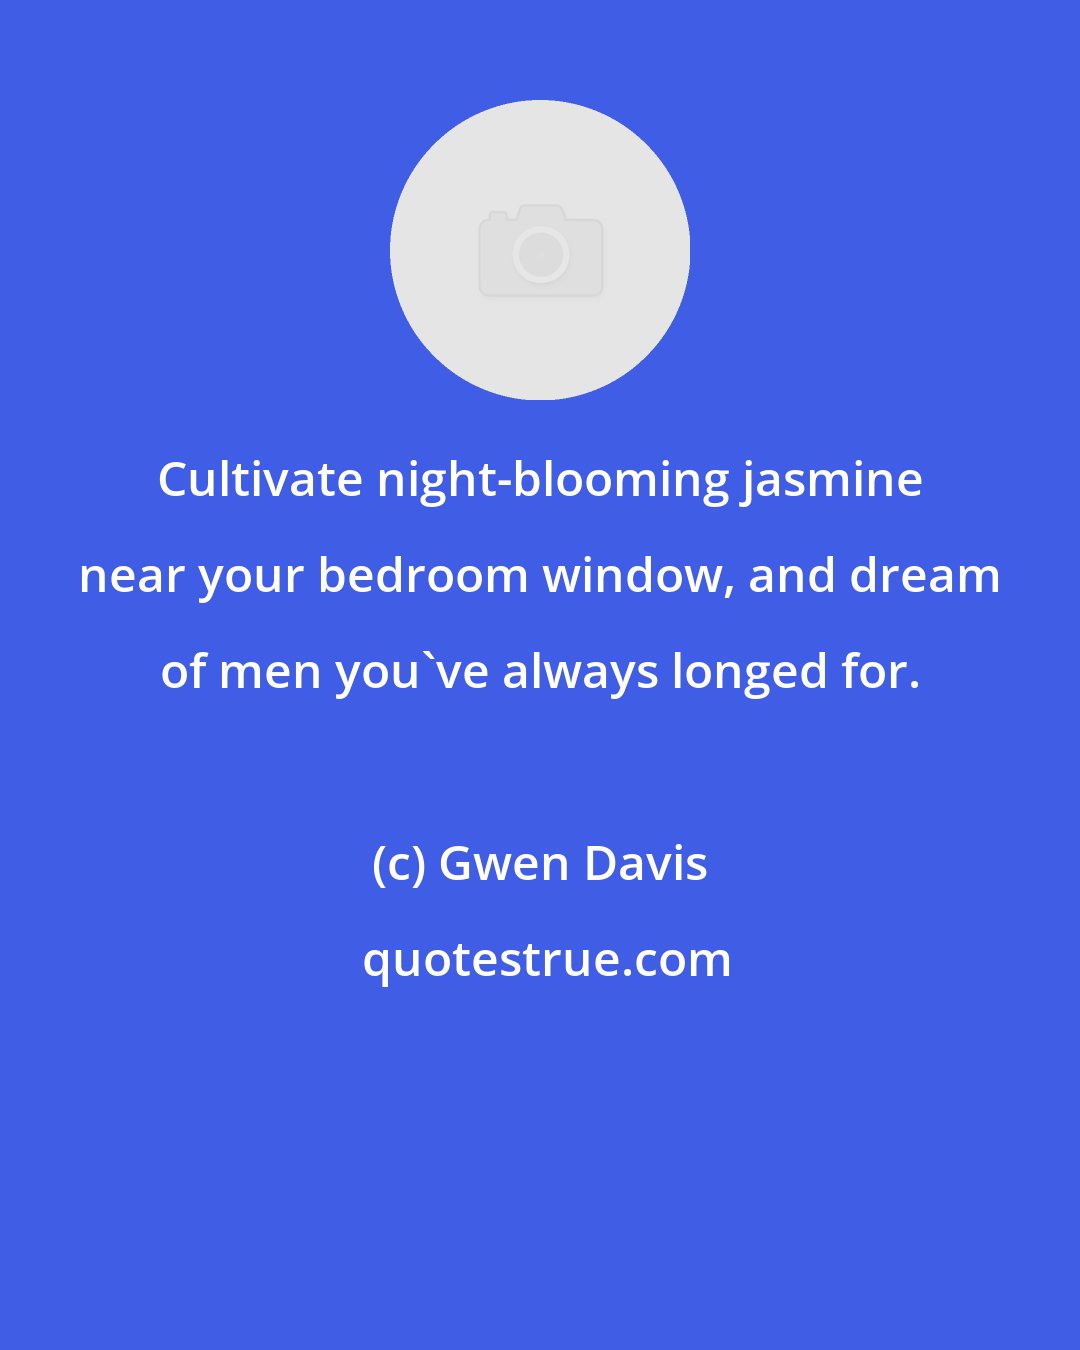 Gwen Davis: Cultivate night-blooming jasmine near your bedroom window, and dream of men you've always longed for.